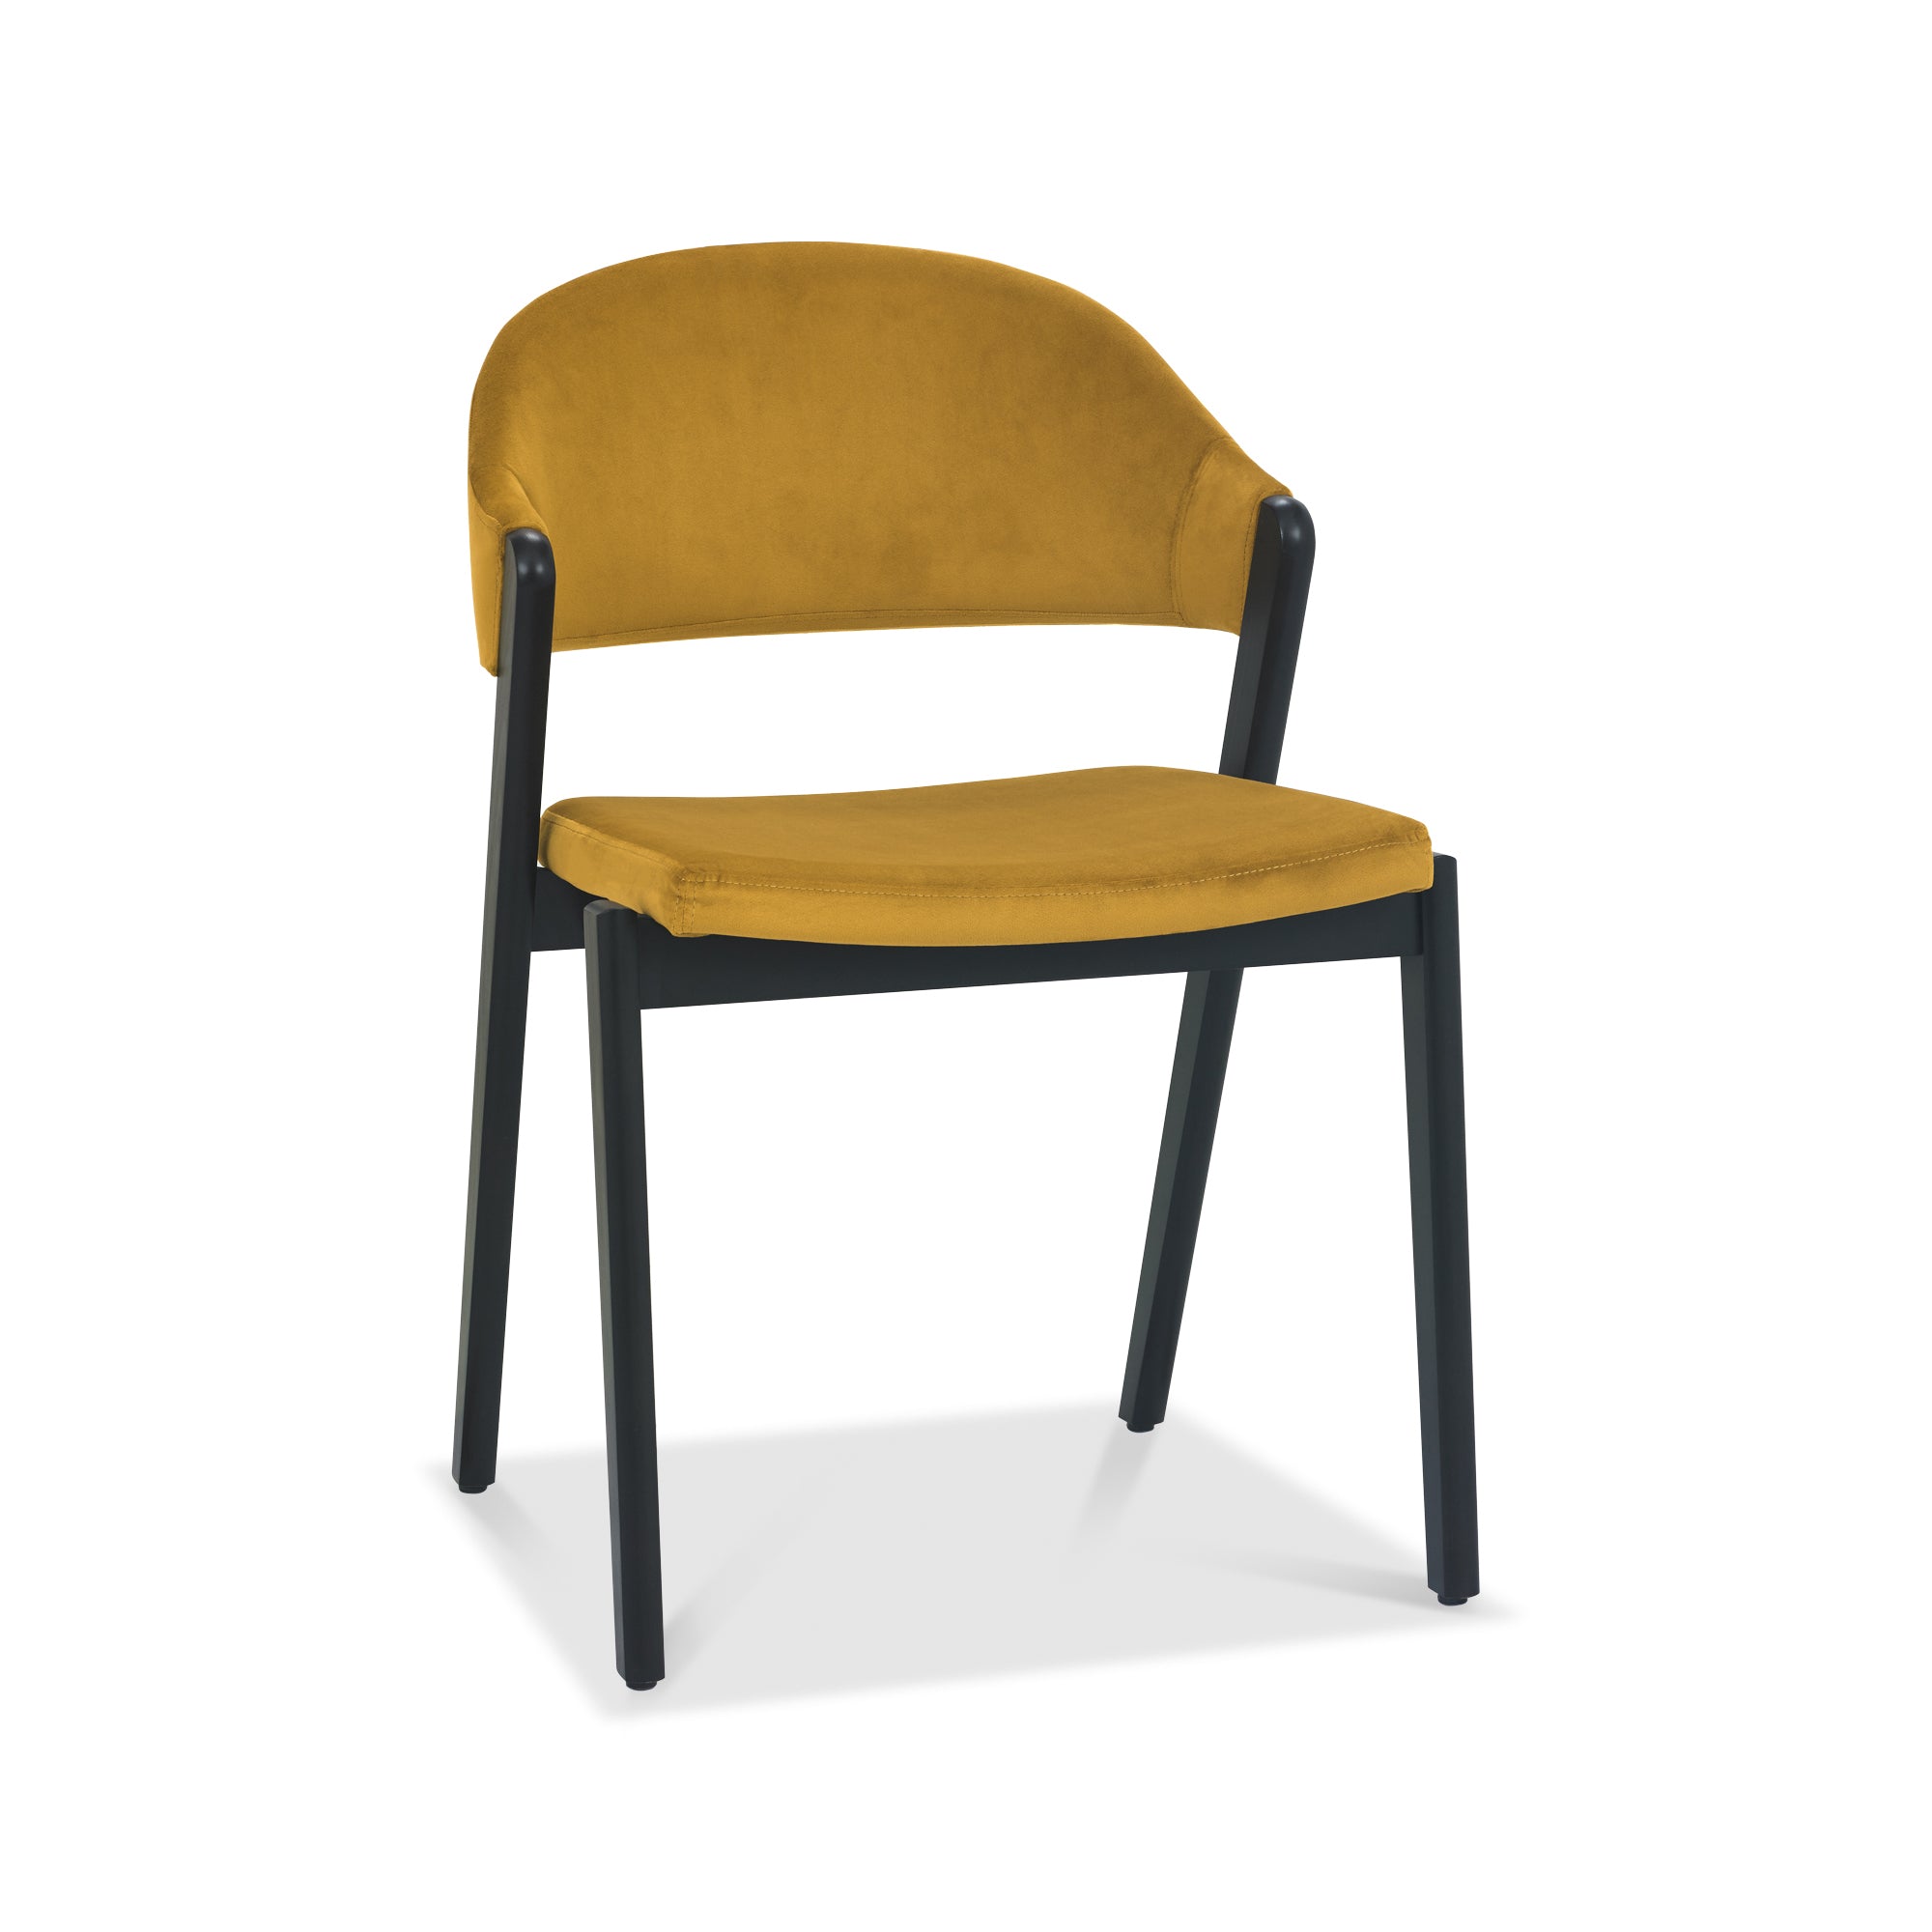 Candice Upholstered Dining Chair - Mustard